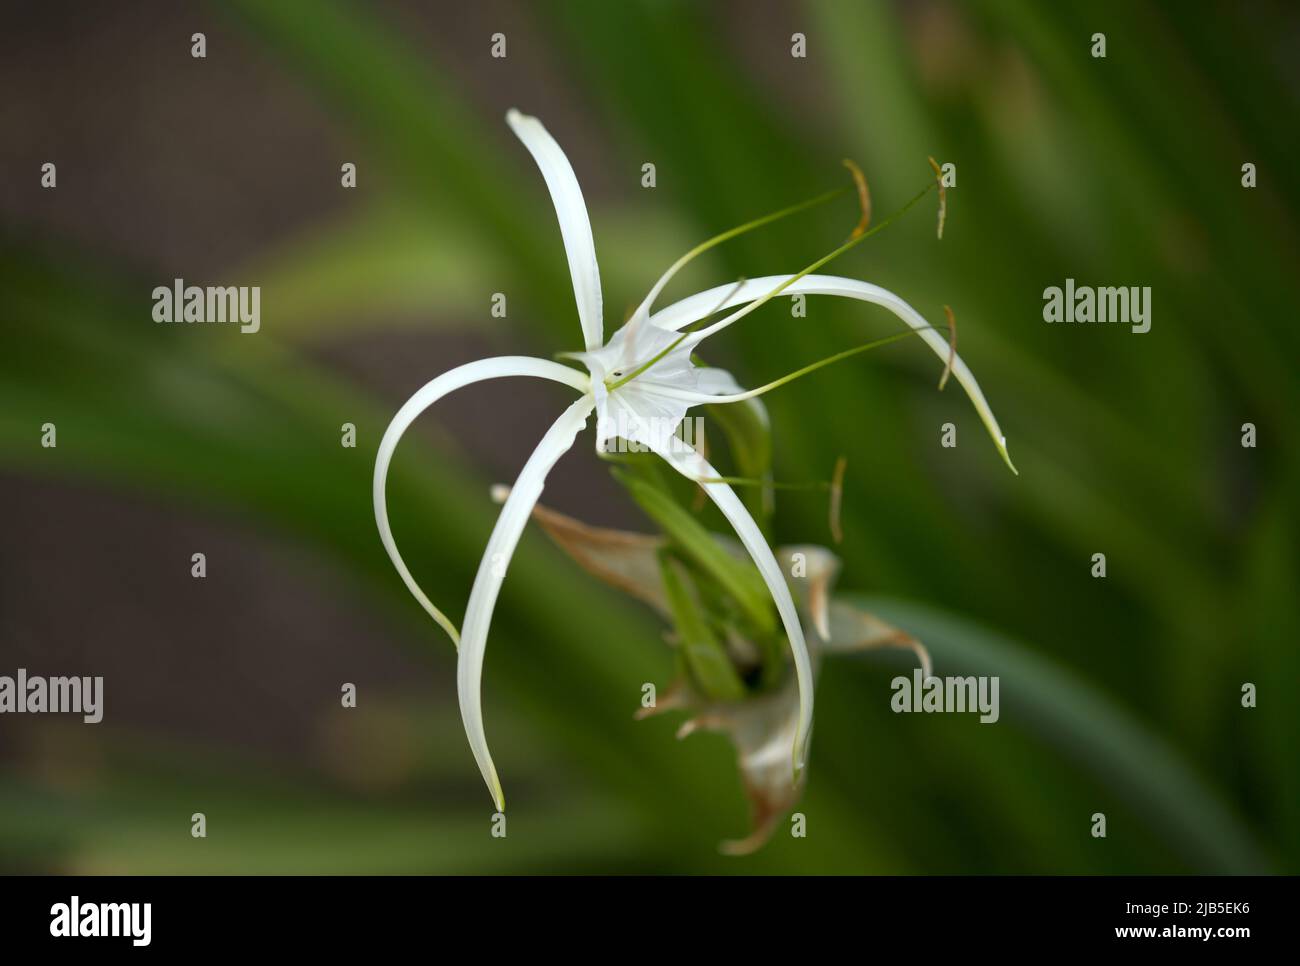 White flowers of Hymenocallis, spider lily, natural macro floral background Stock Photo